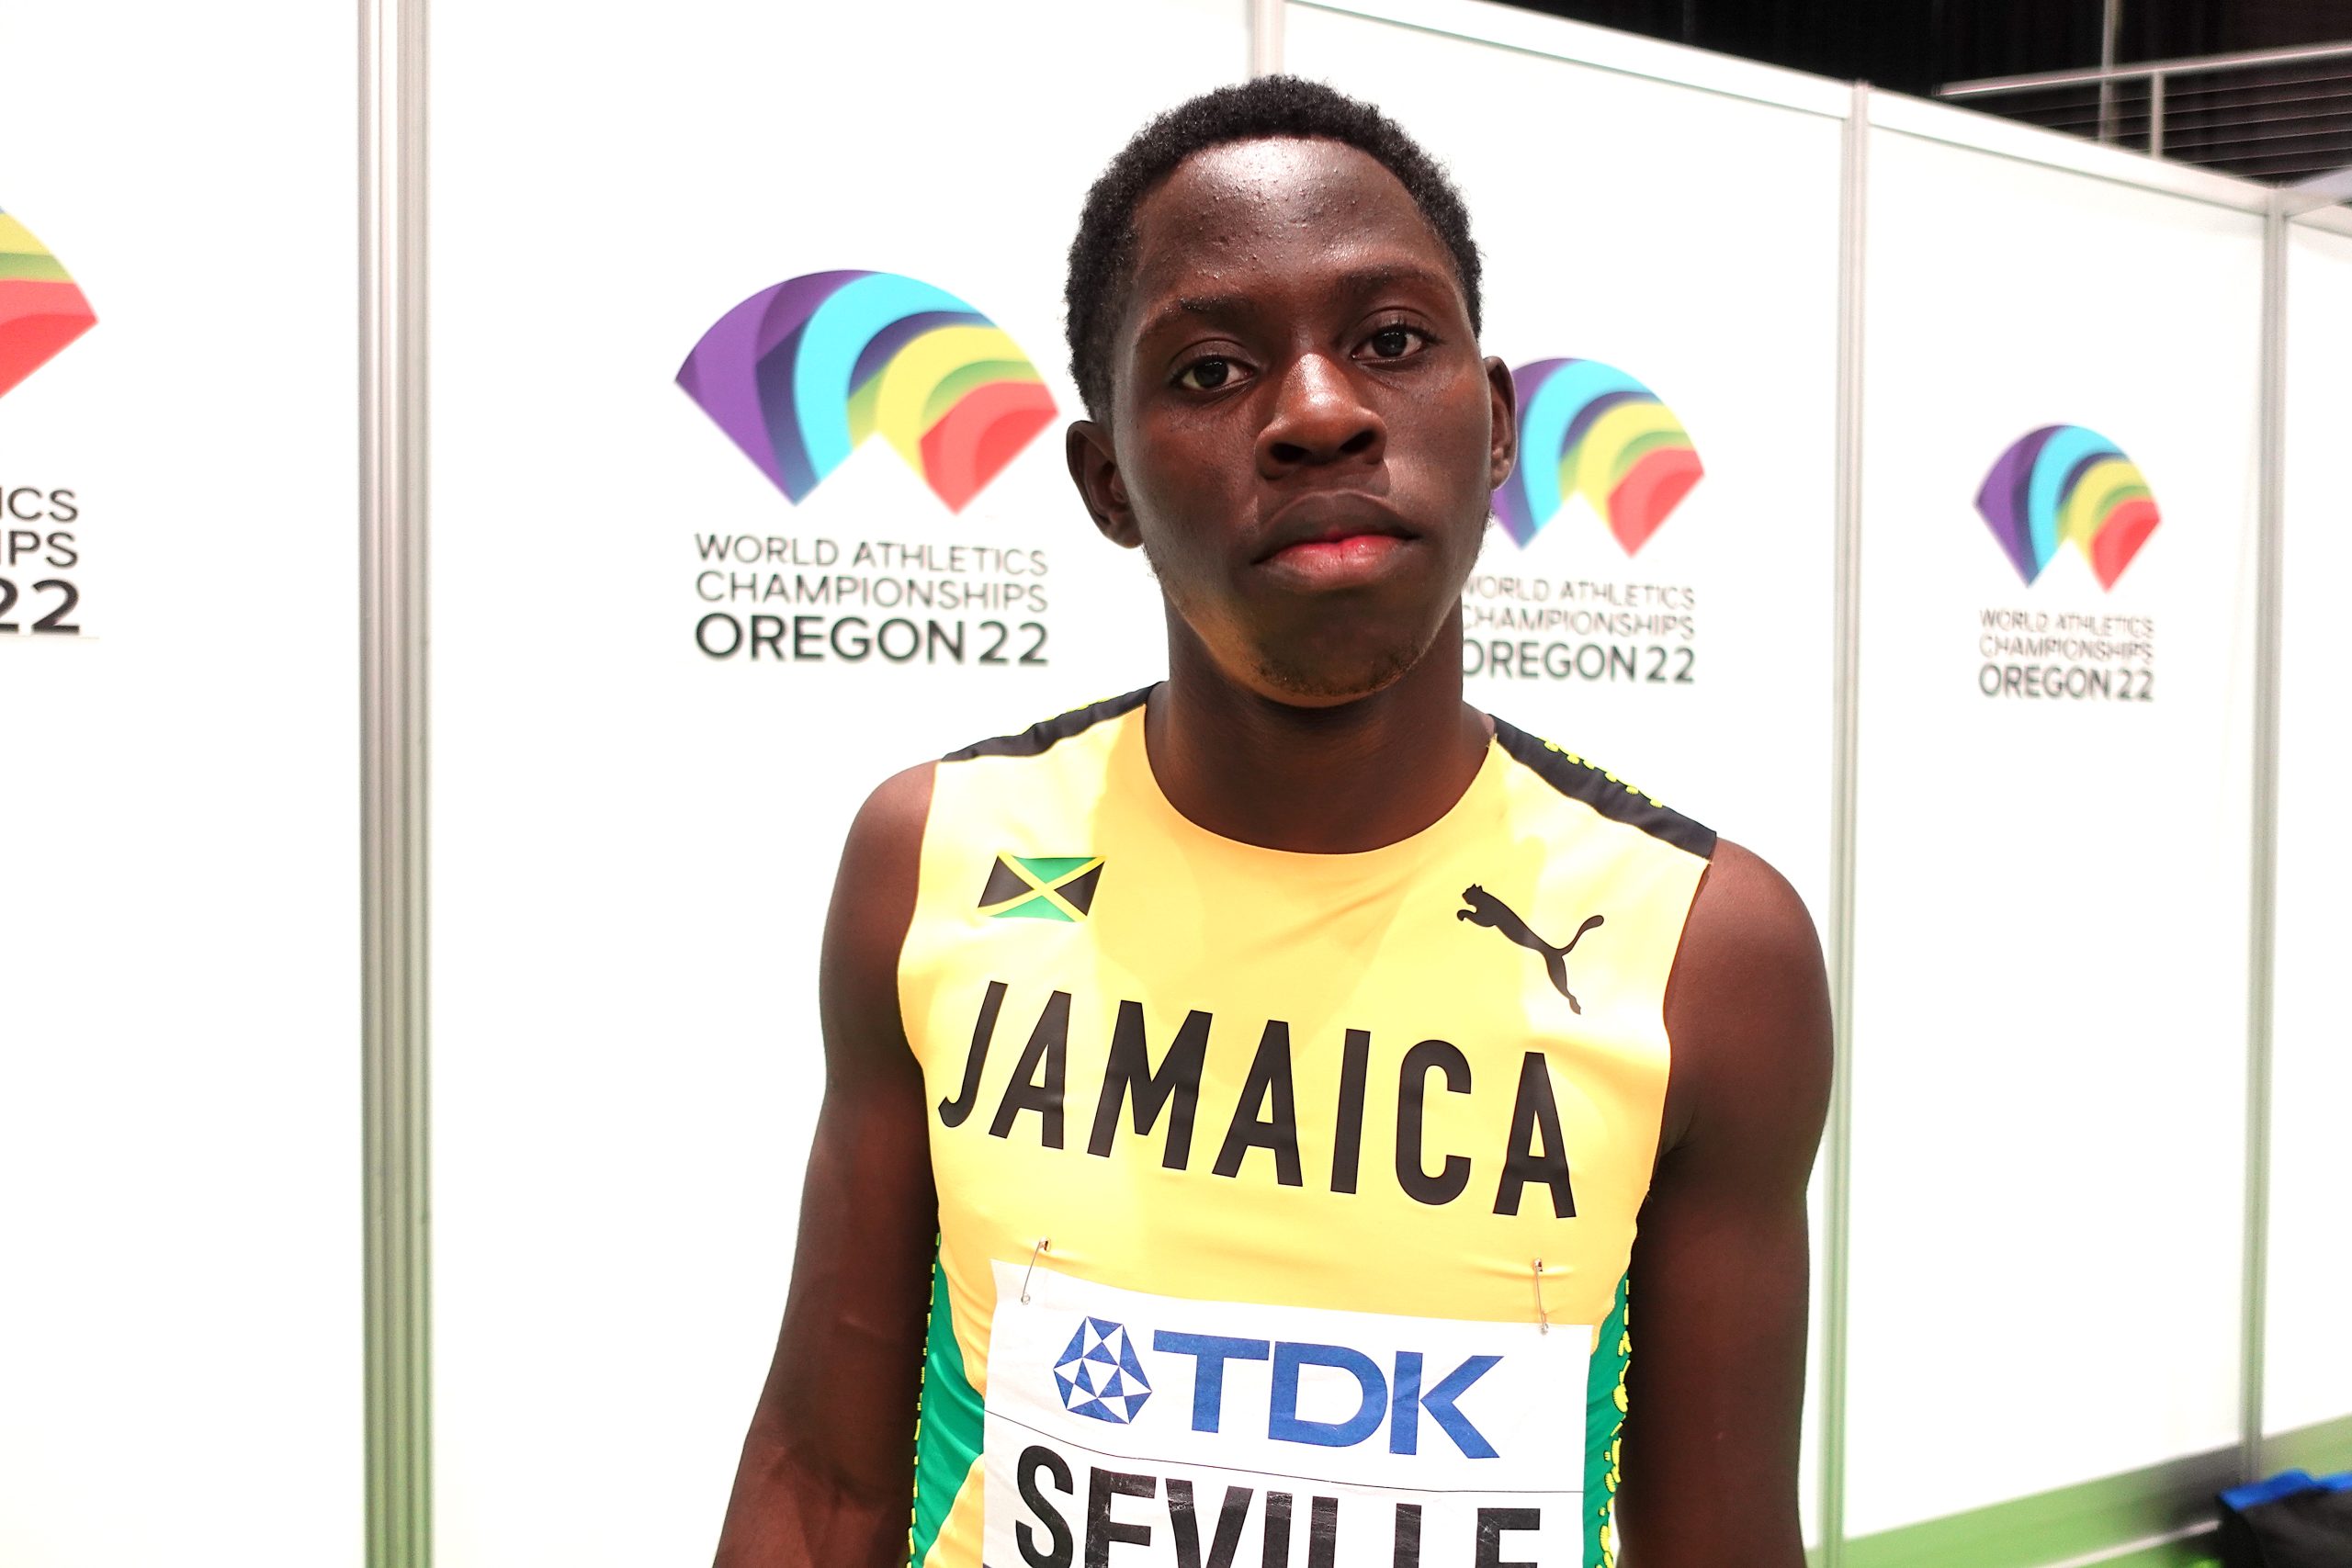 Seville Clinches Men's 100m Title at John Wolmer's Speed Fest in Kingston